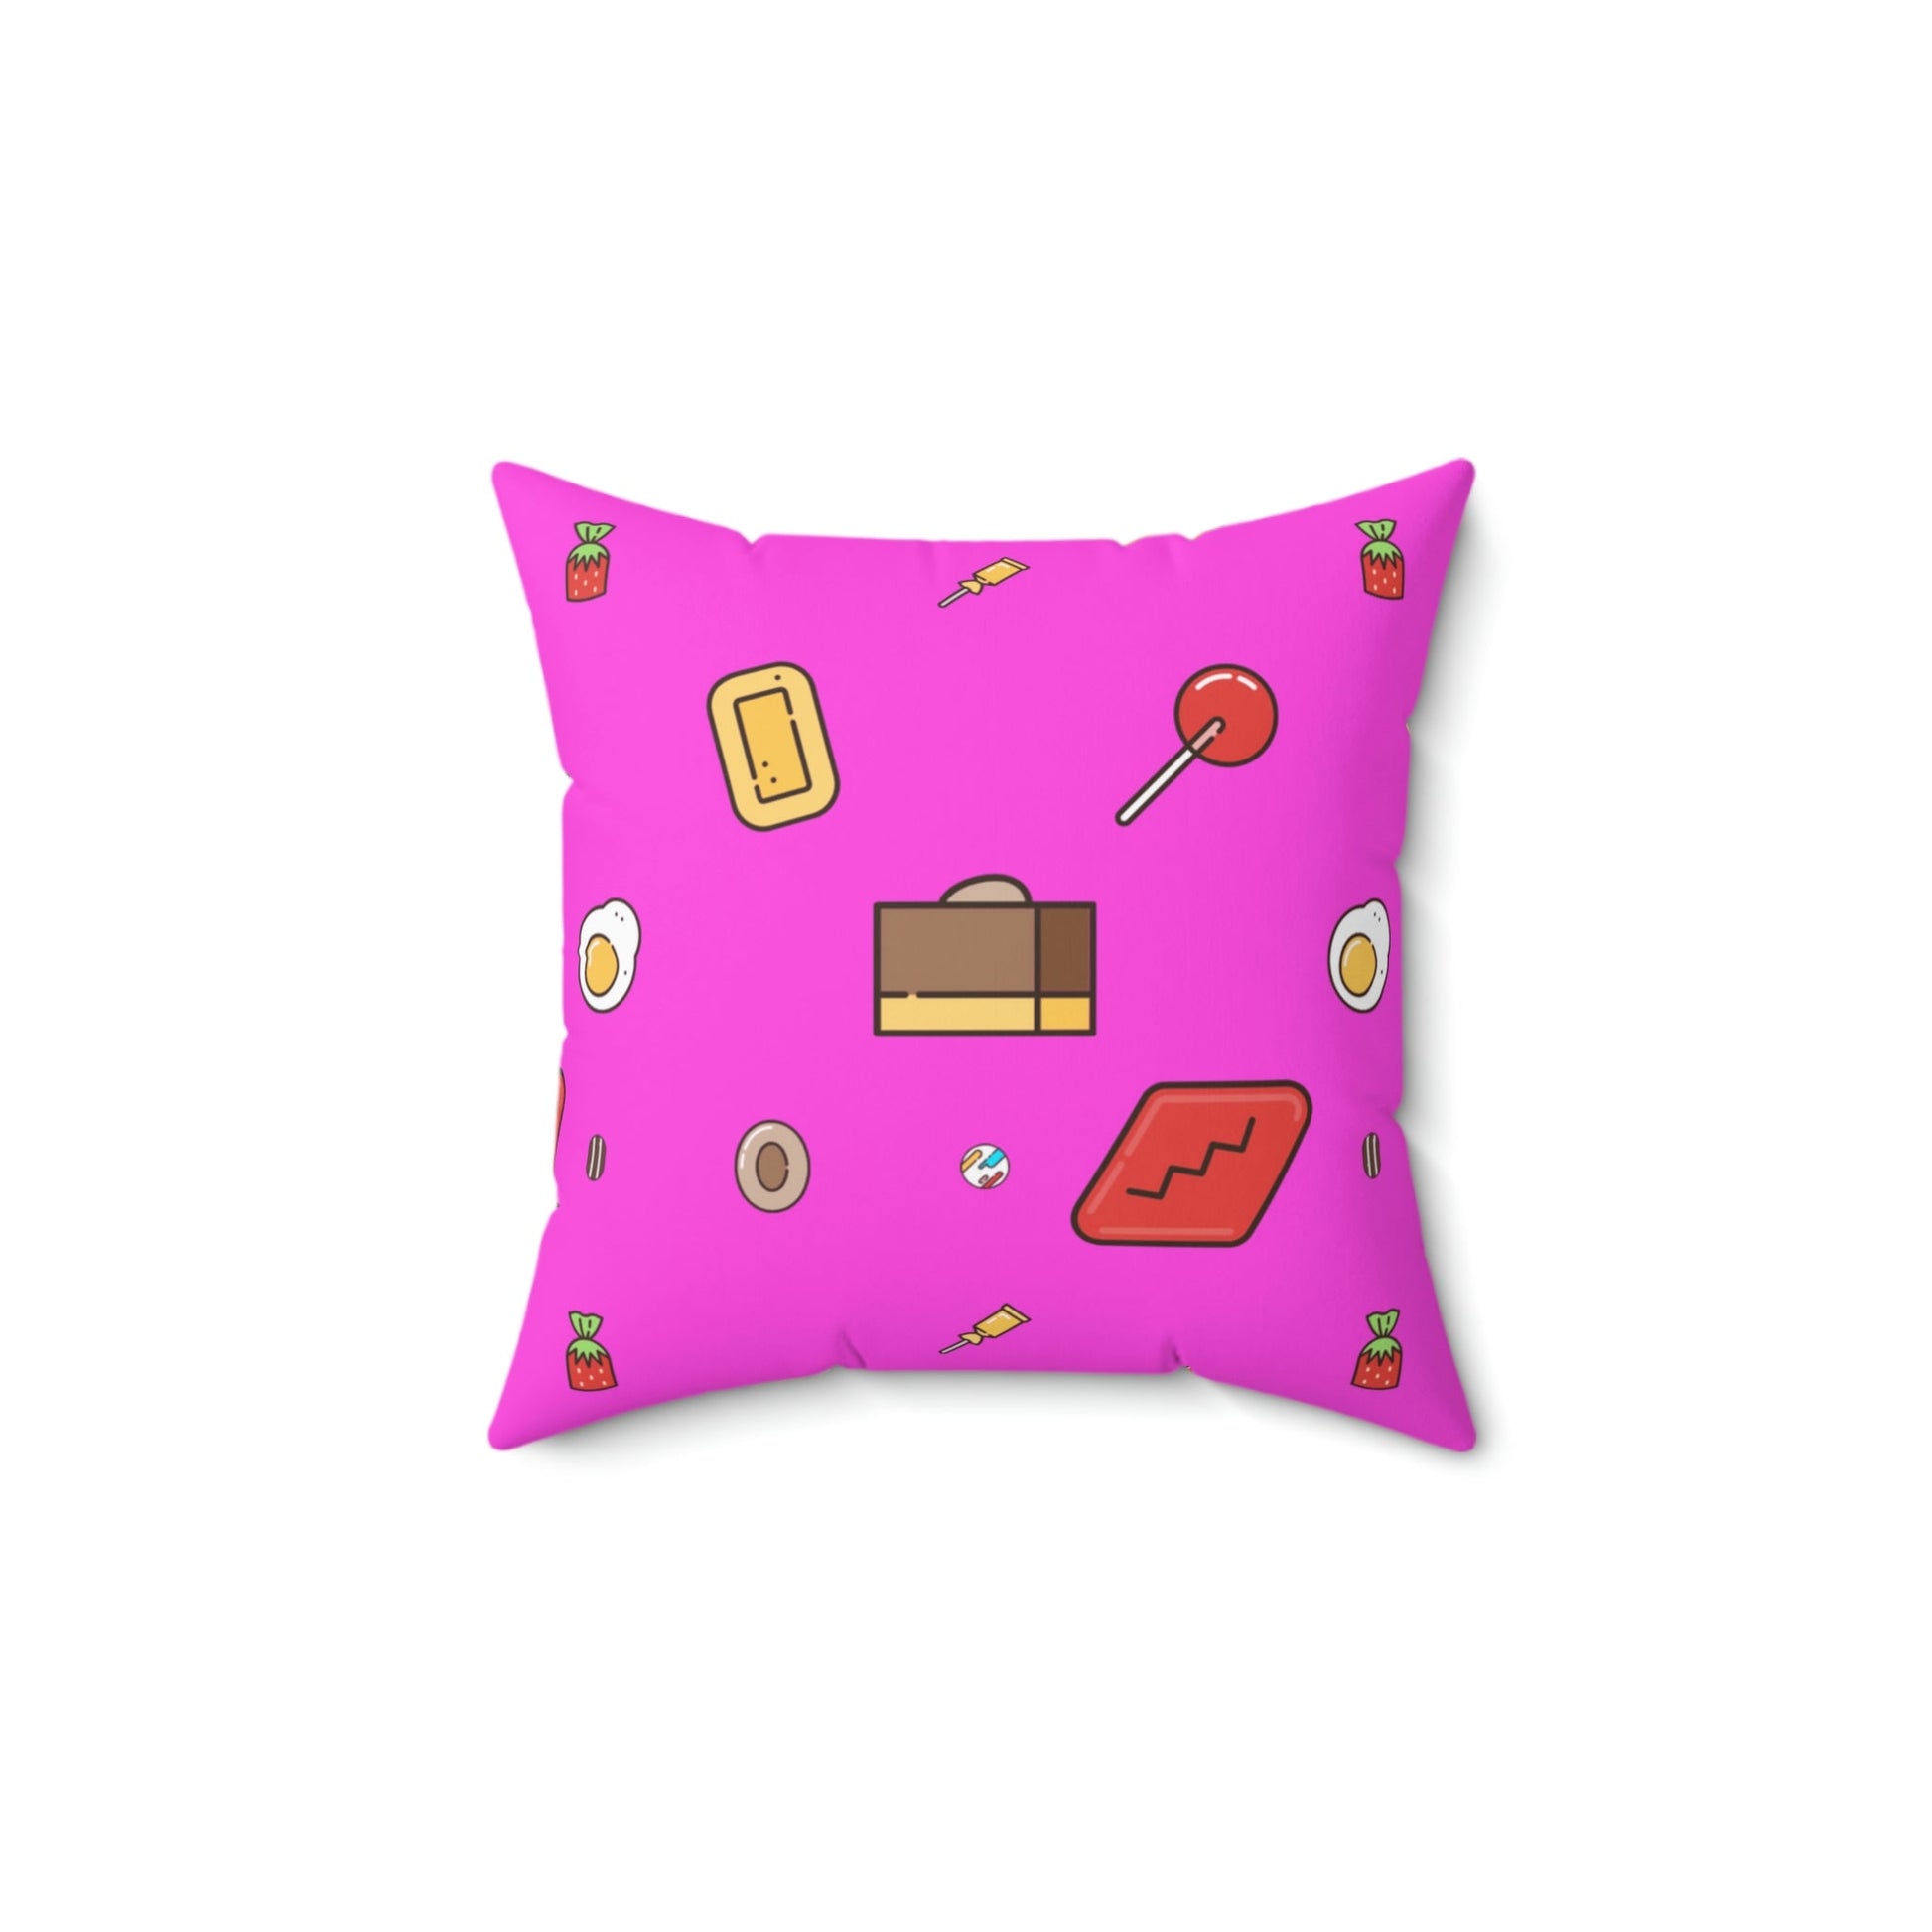 Caught in Candy Square Pillow Home Decor Pink Sweetheart